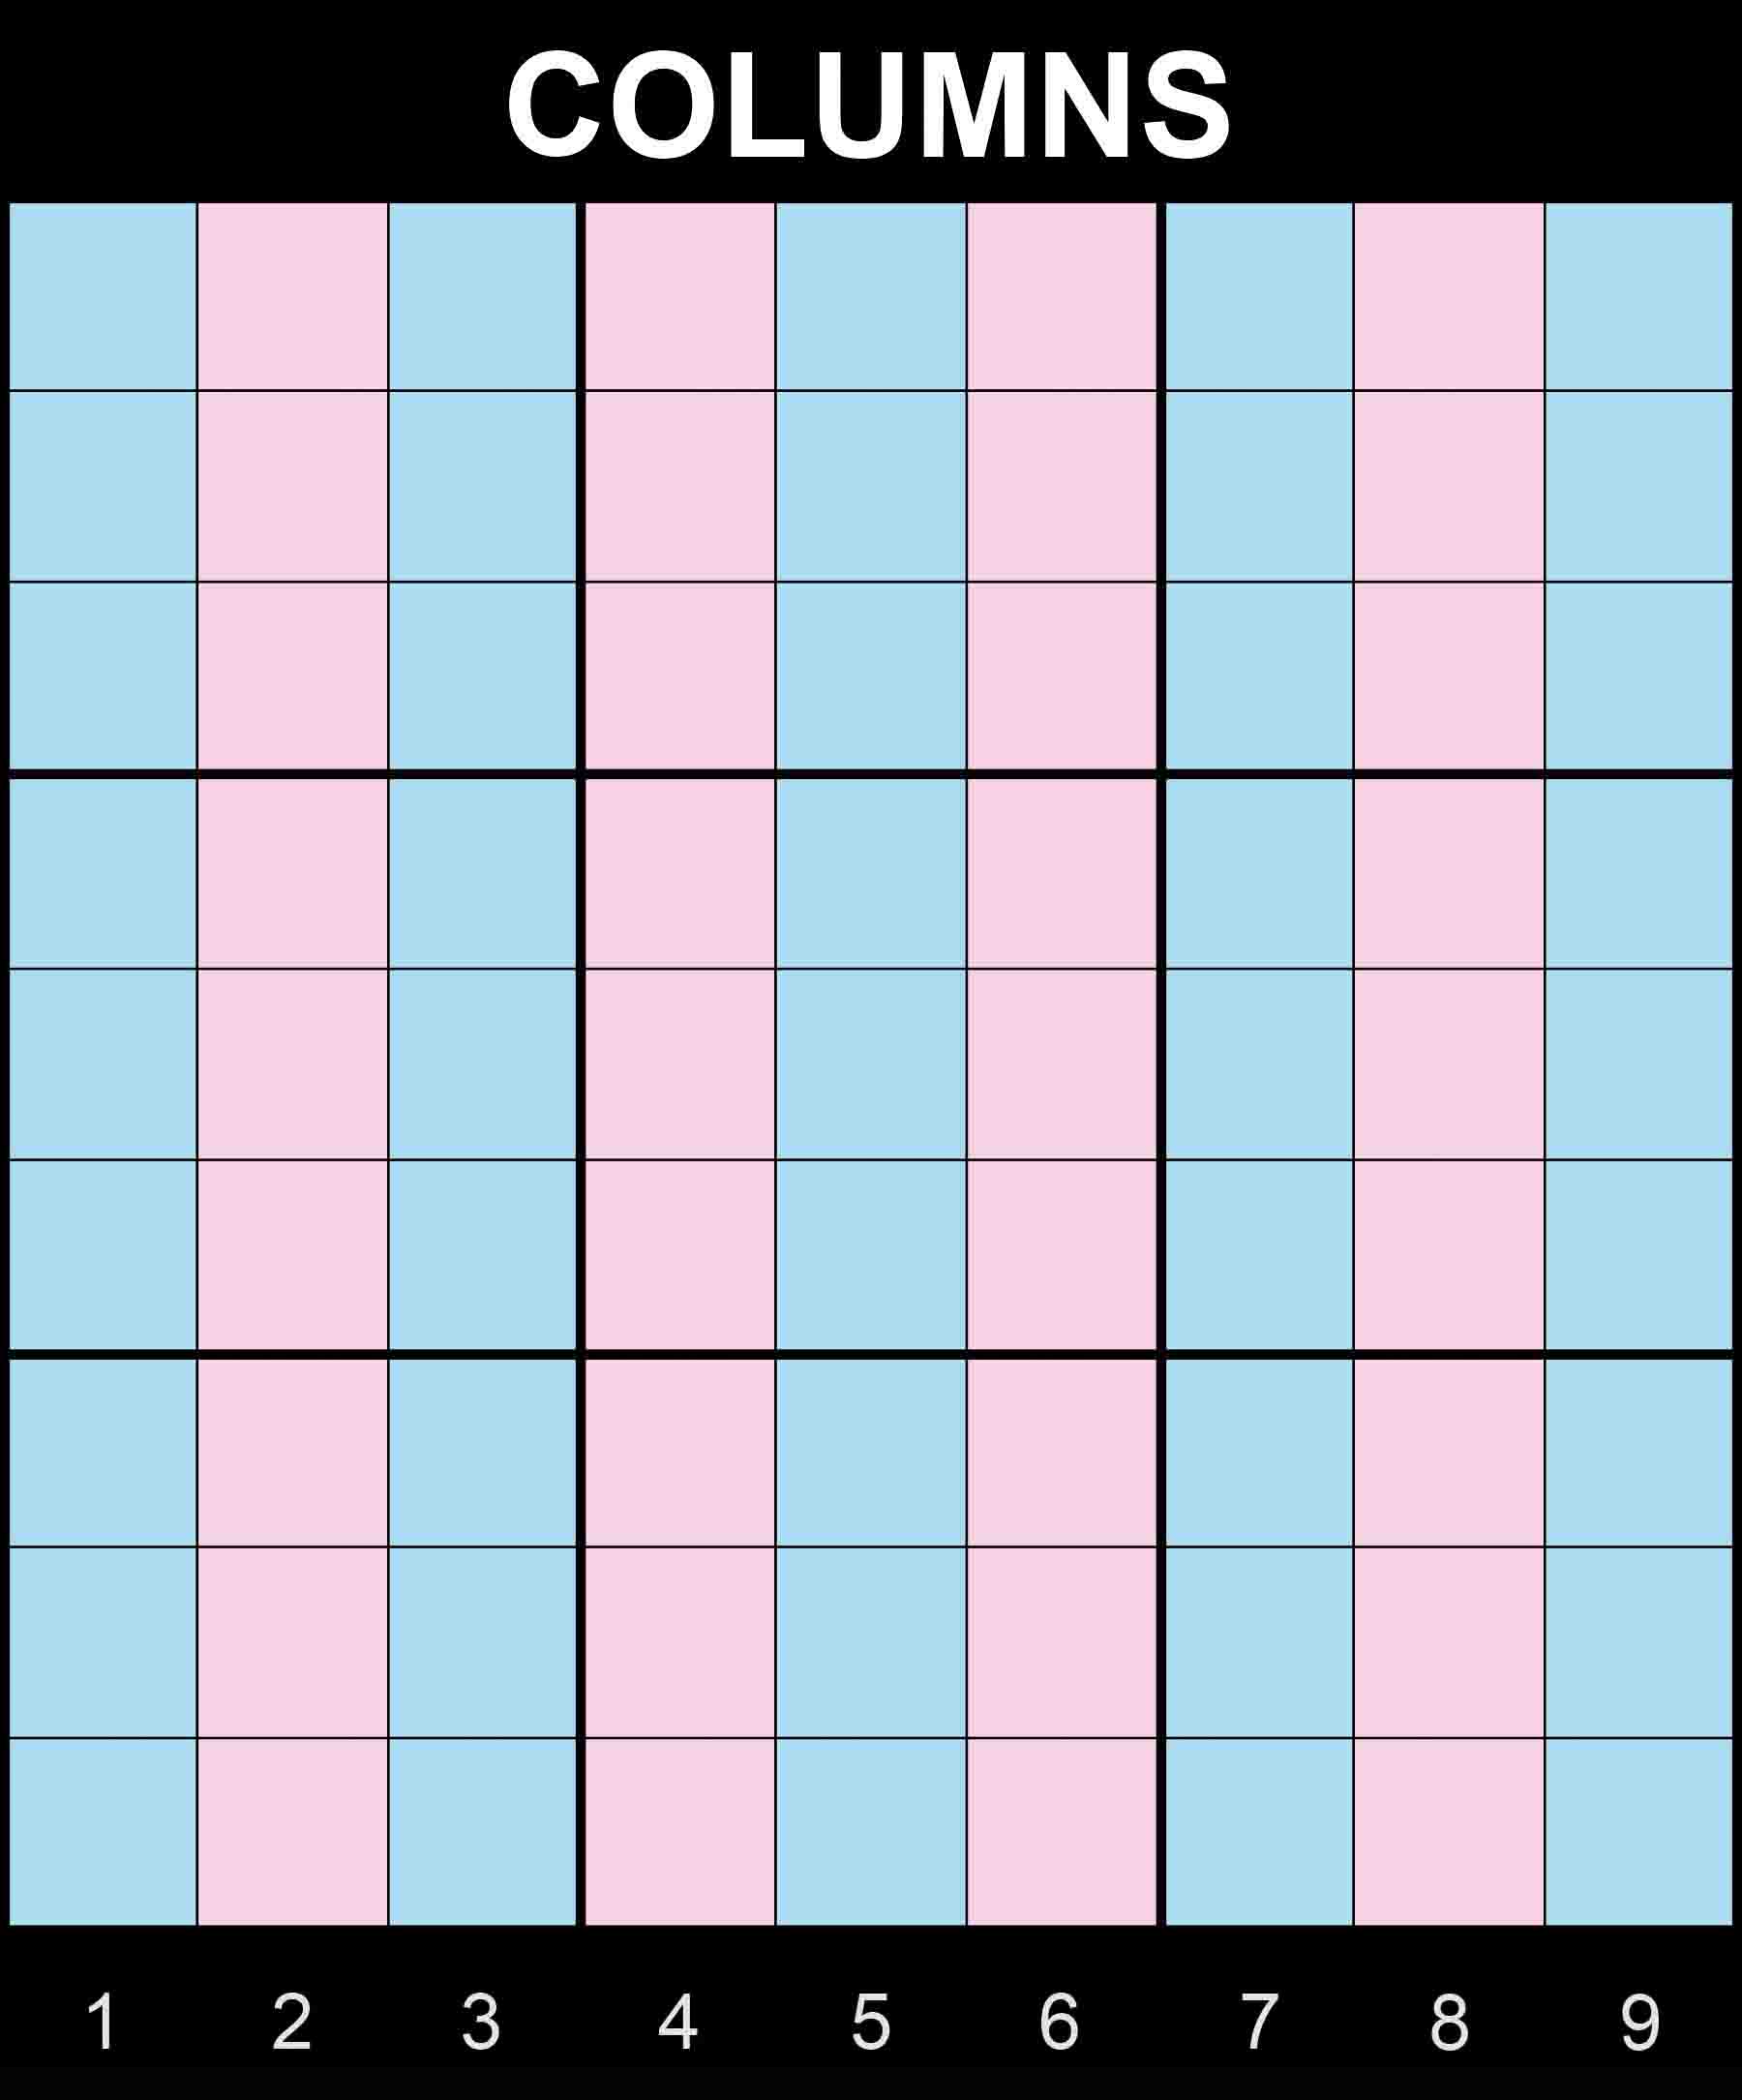 sudoku rows and columns